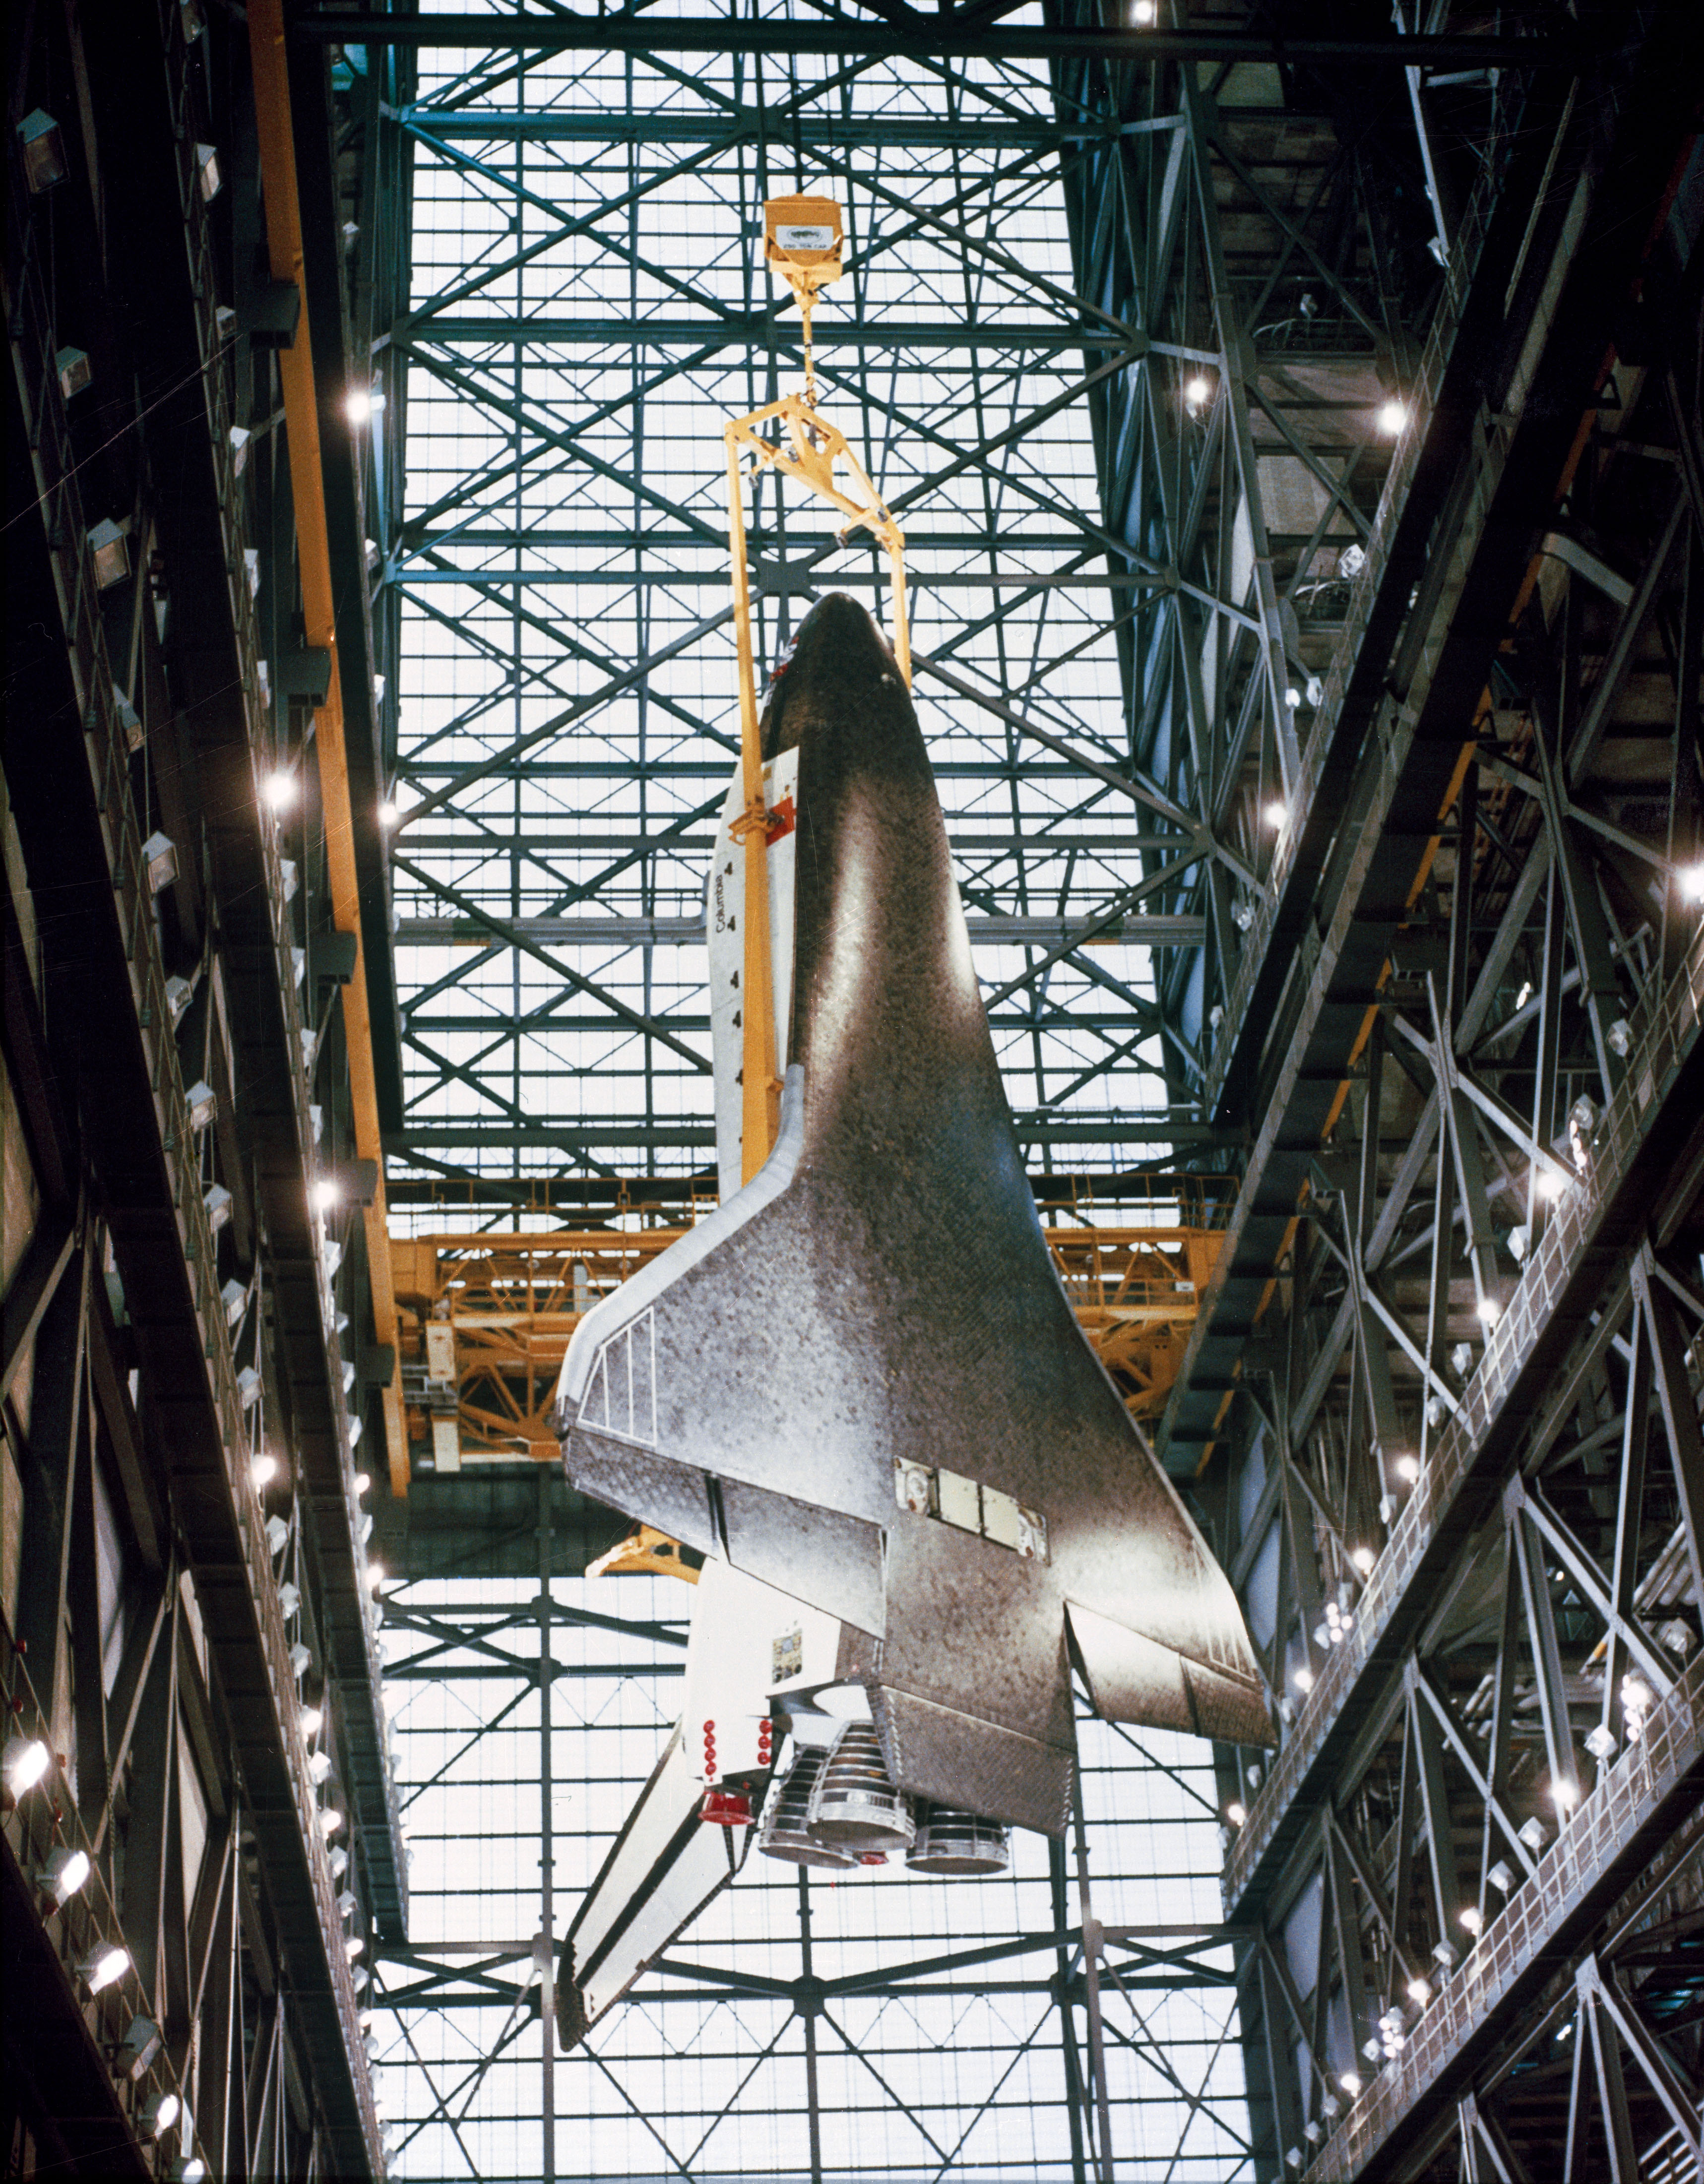 Workers hoist Columbia in KSC’s Vehicle Assembly Building (VAB) for mating with its external tank and solid rocket boosters